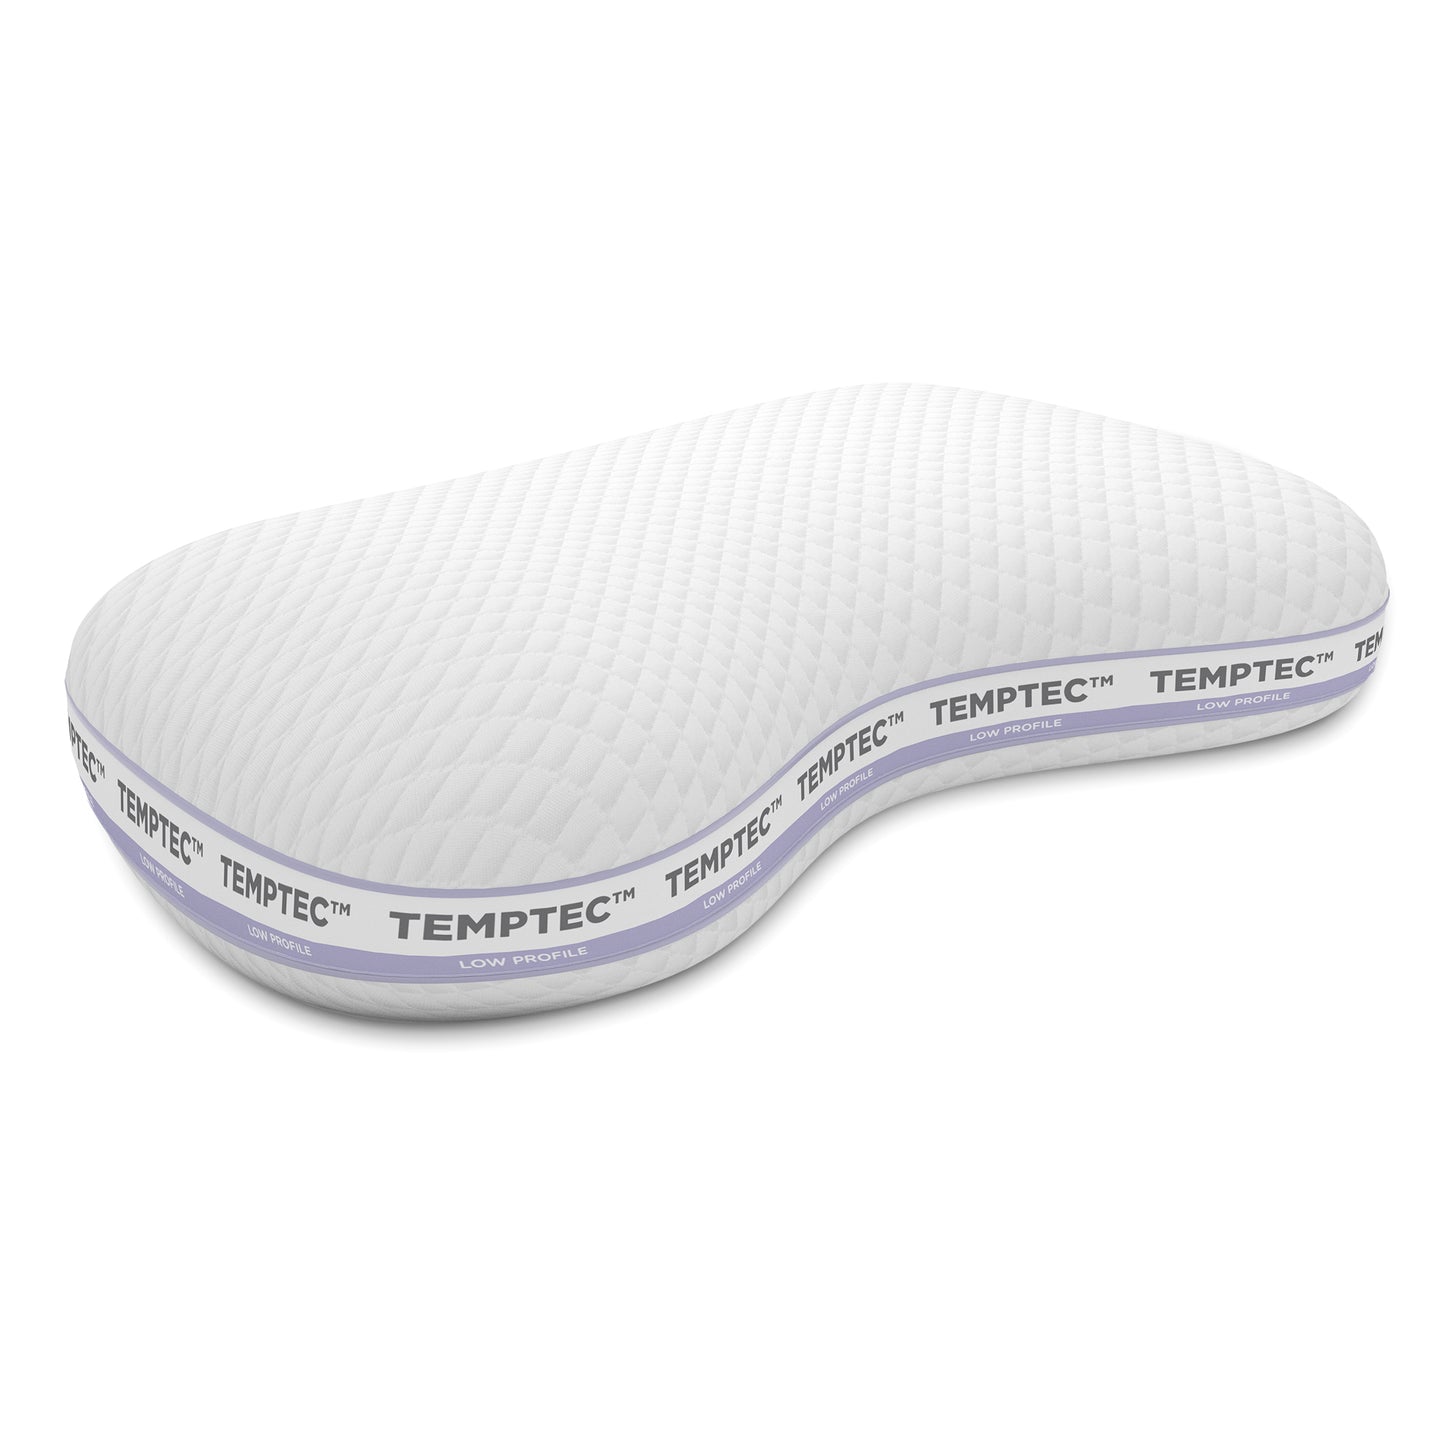 TruPhase Pillow